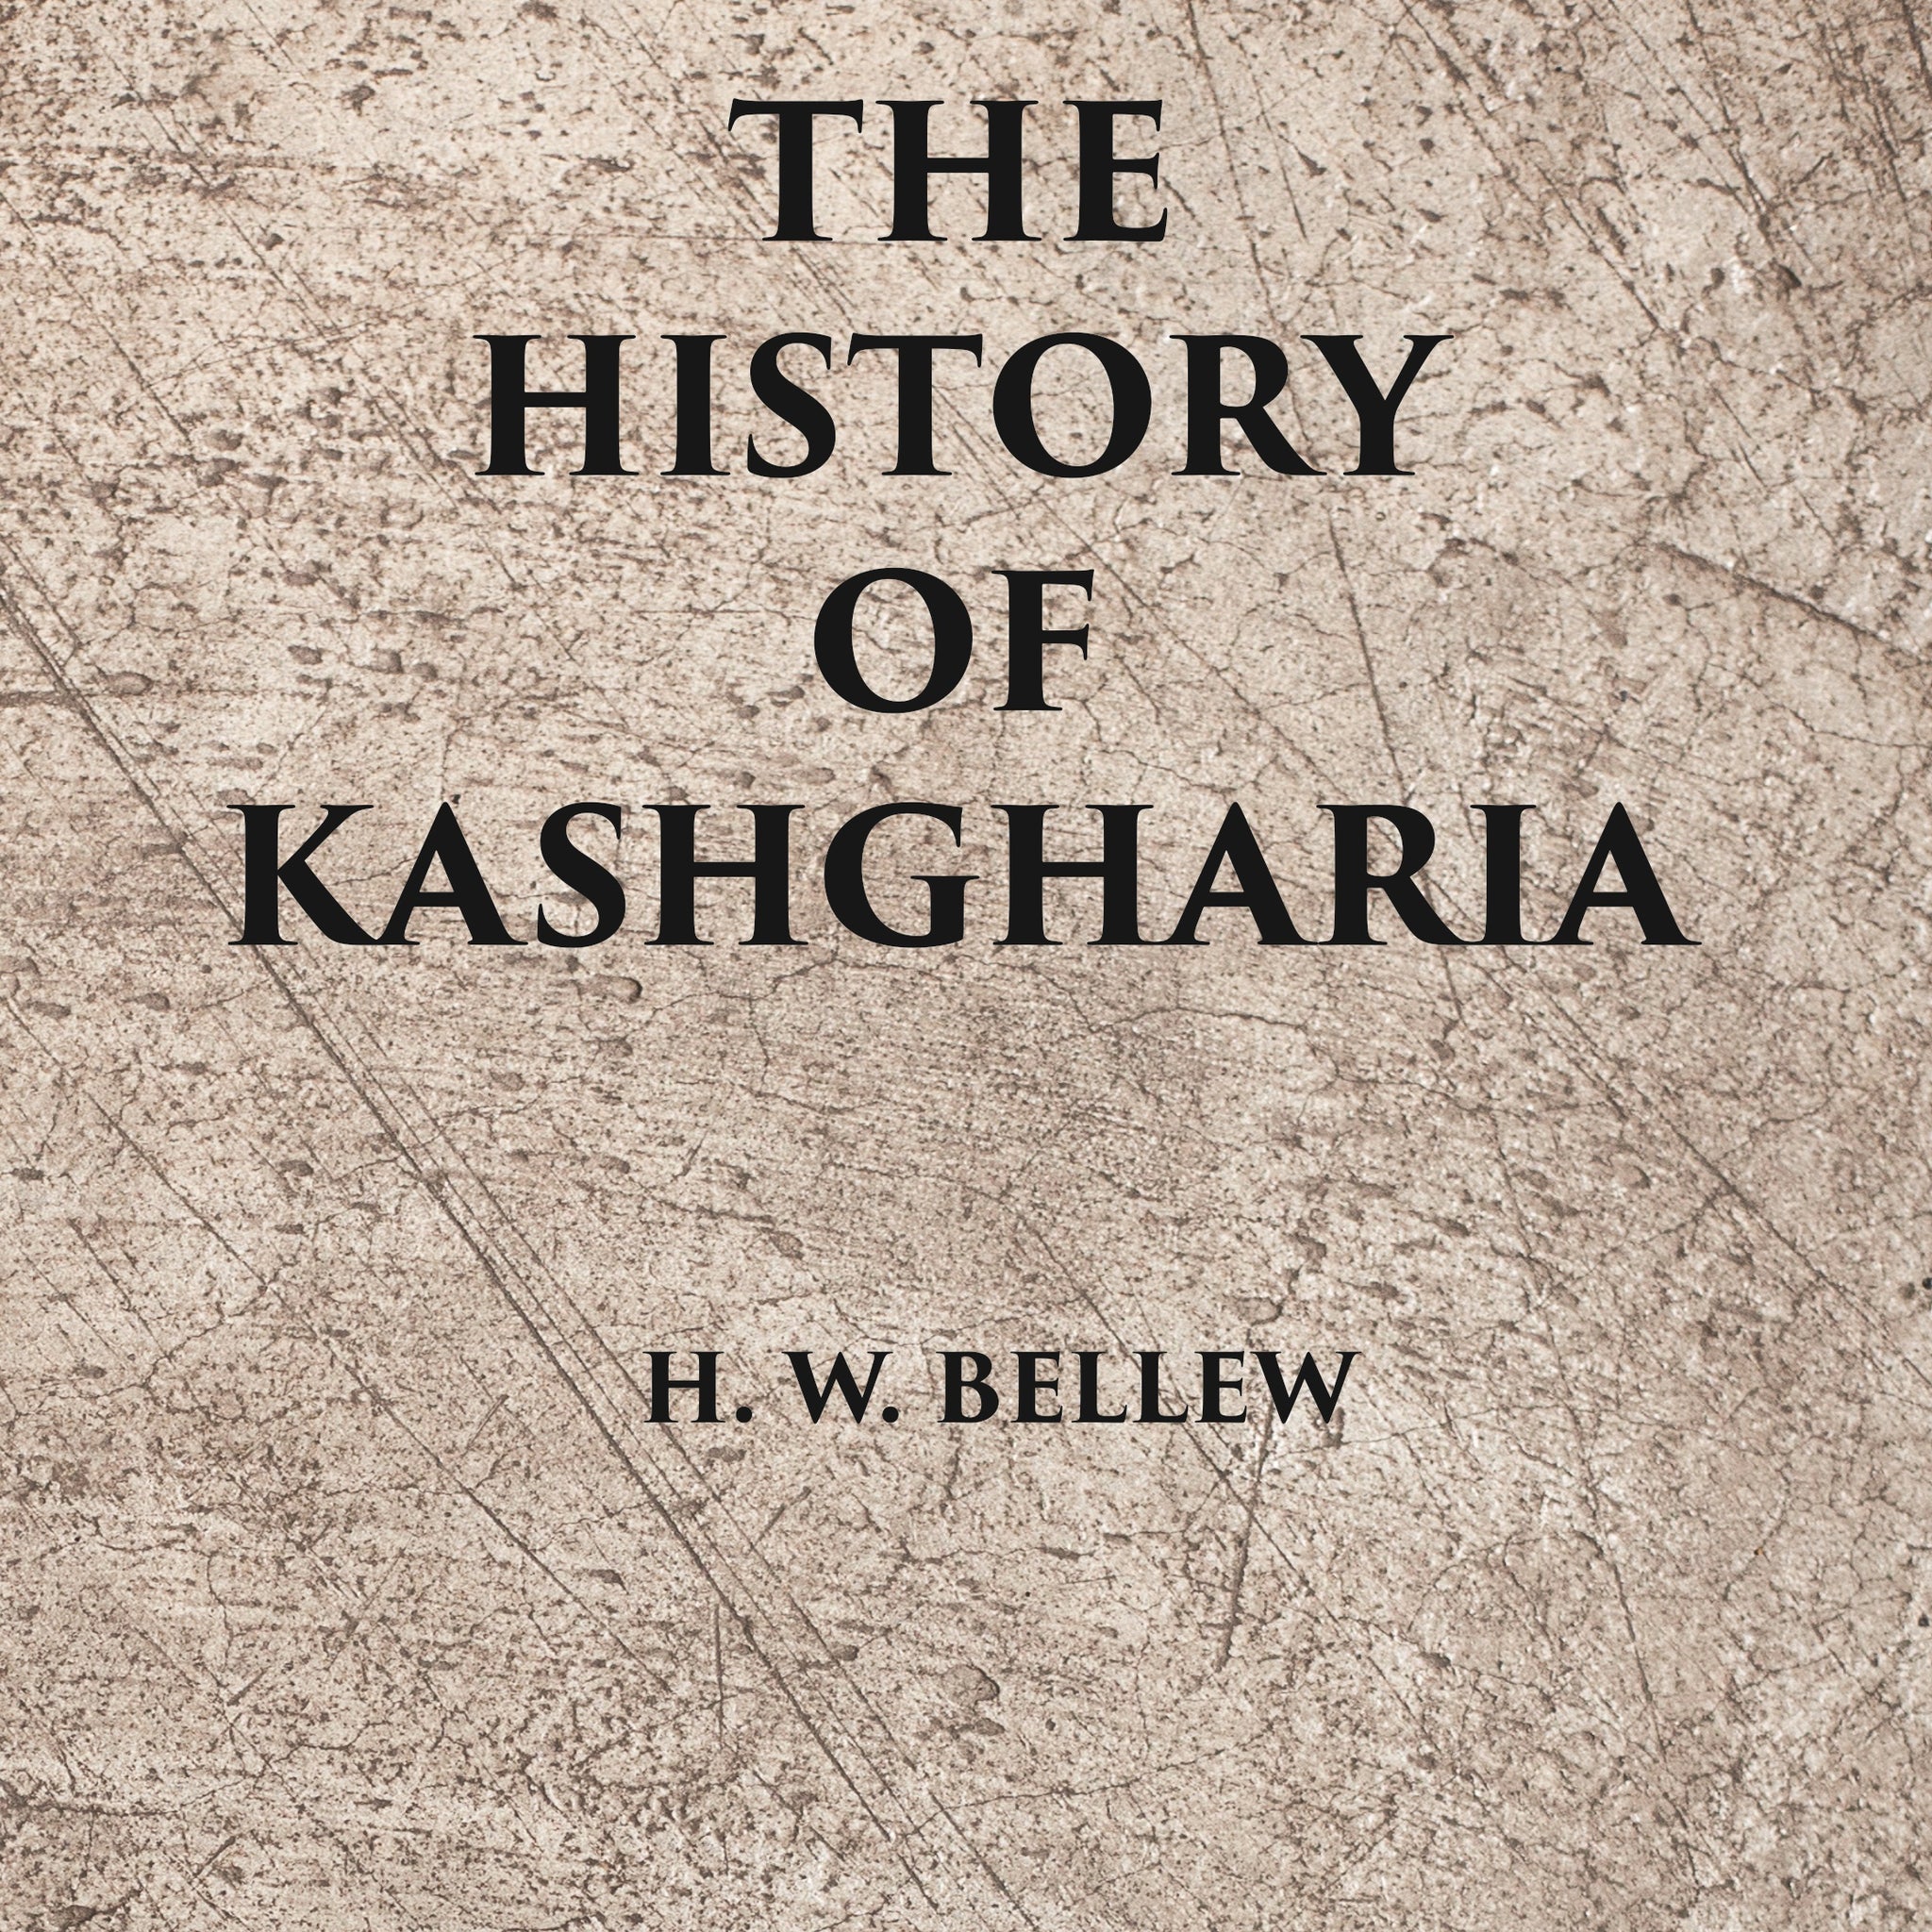 The History Of Kashgharia